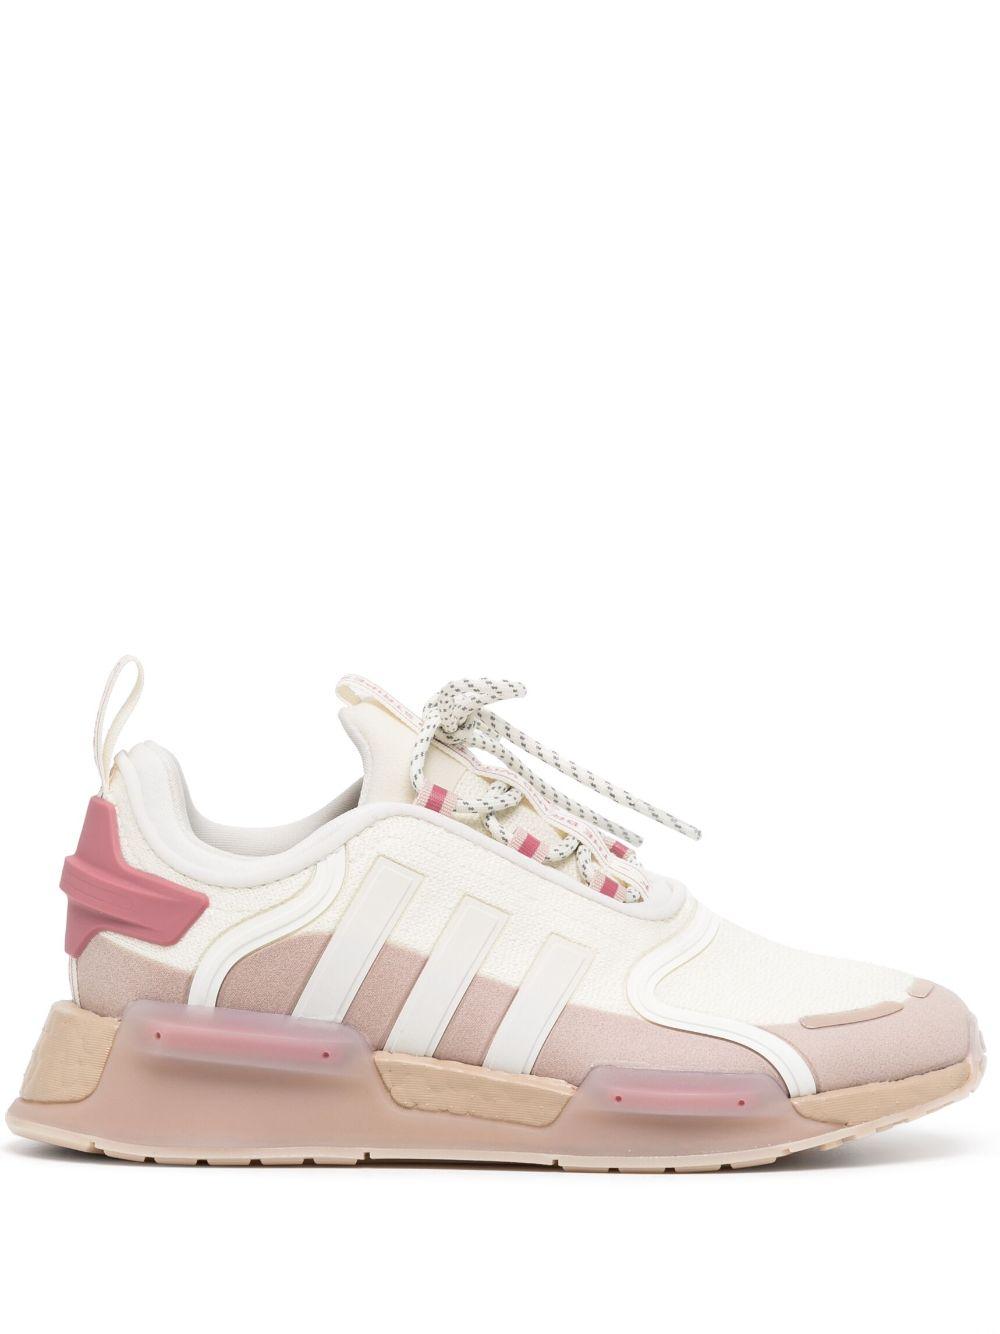 adidas Nmd R1 V3 Low-top Sneakers in Pink | Lyst